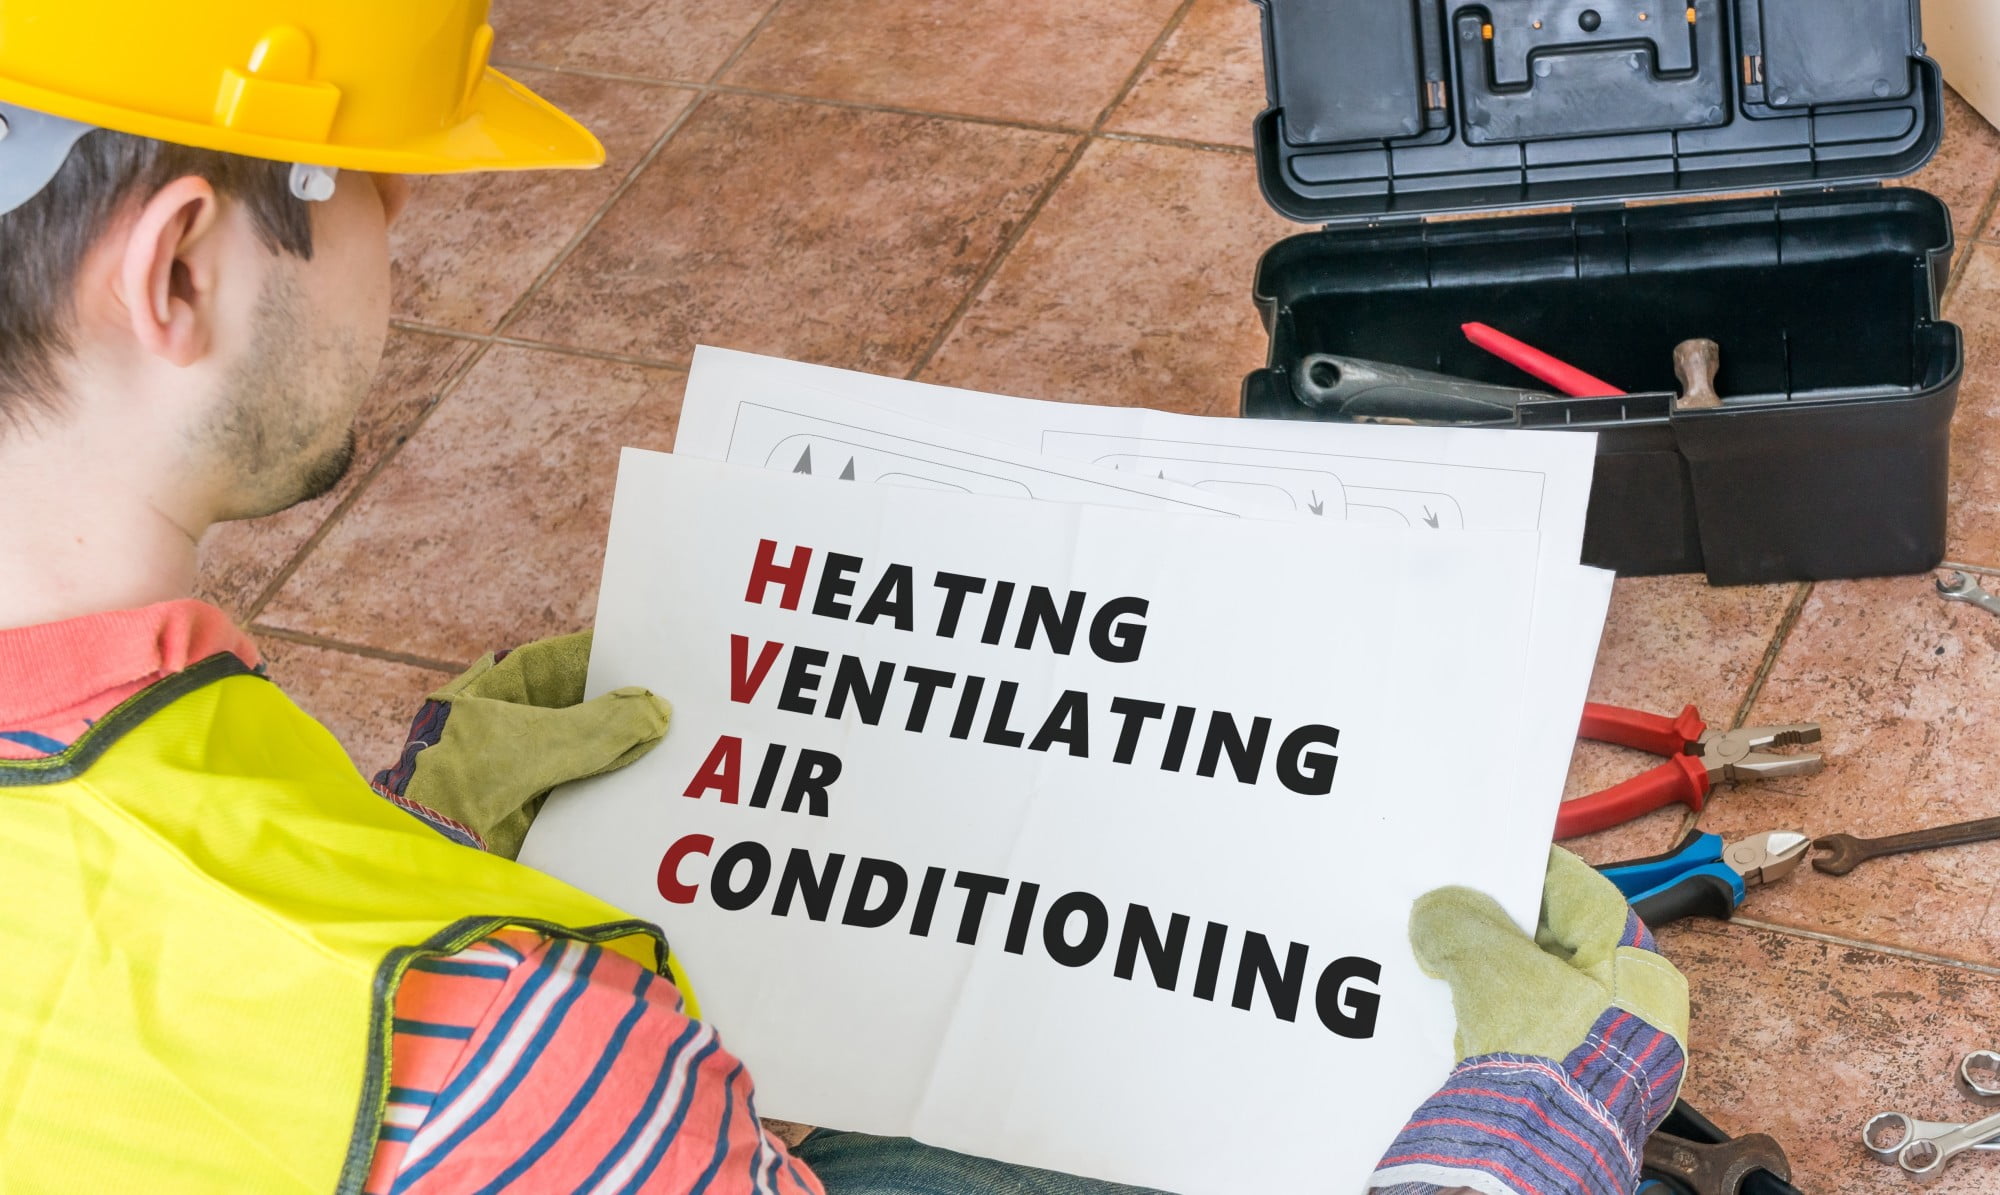 Here are five basic things you can do to maintain your HVAC system and potentially avoid major problems in-between service calls.